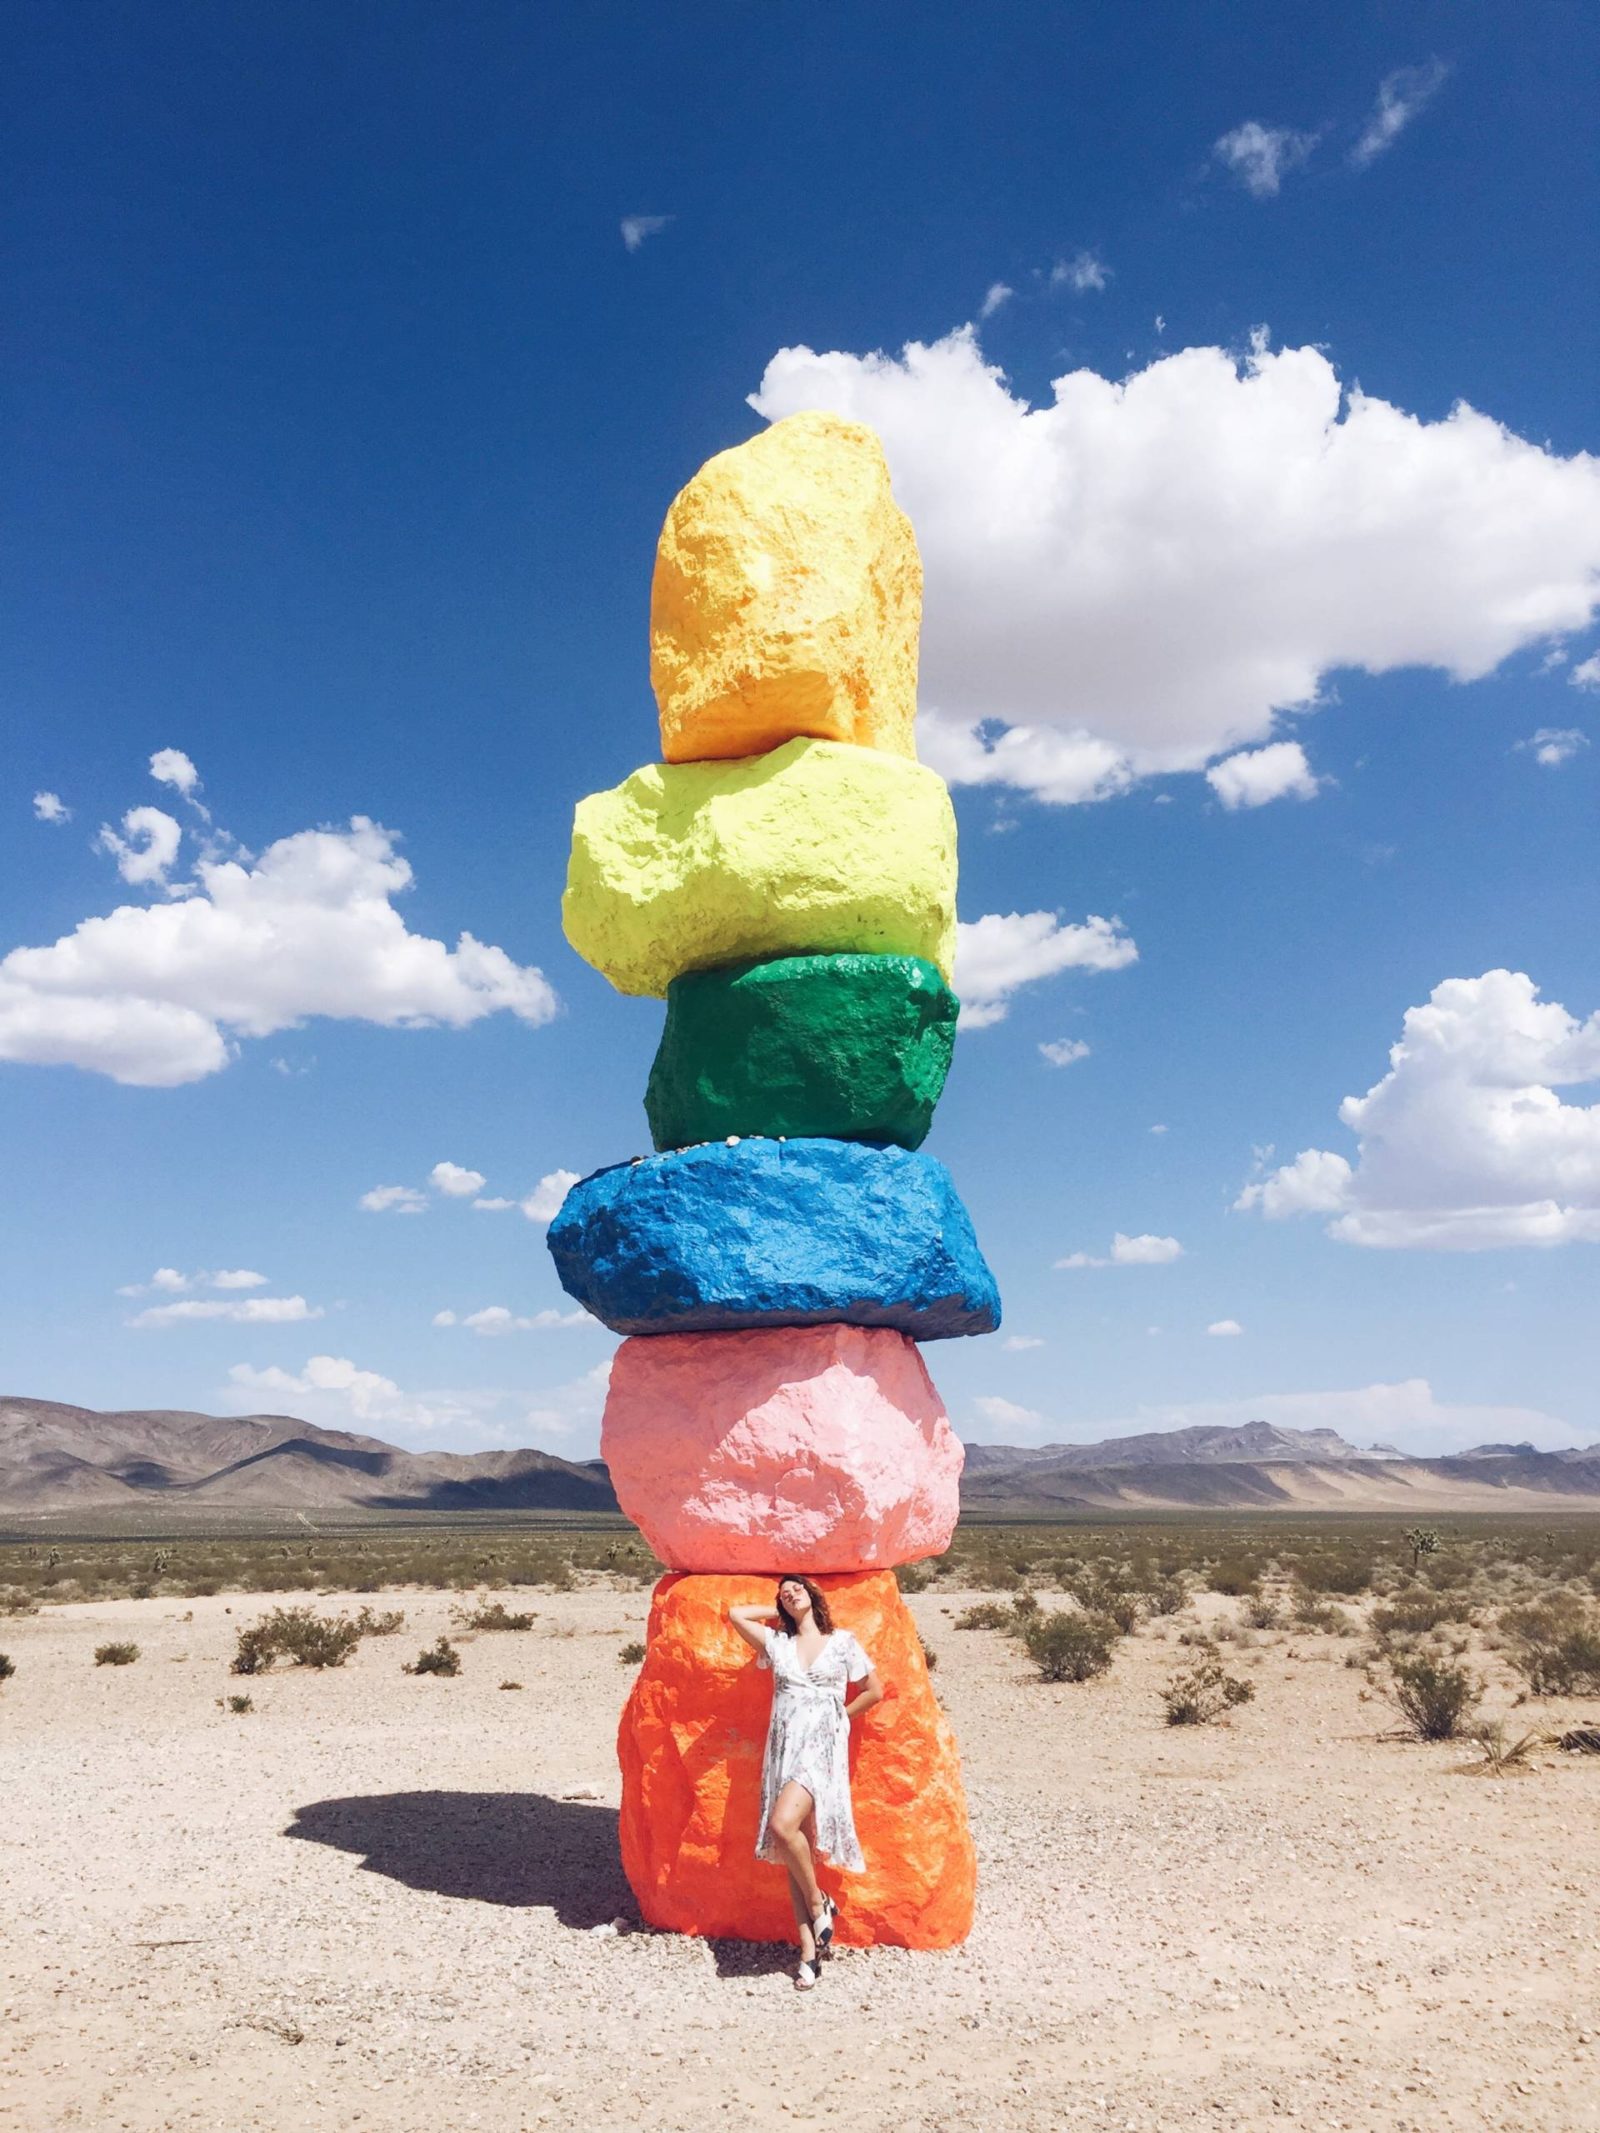 7 magic mountains - must have sunglasses